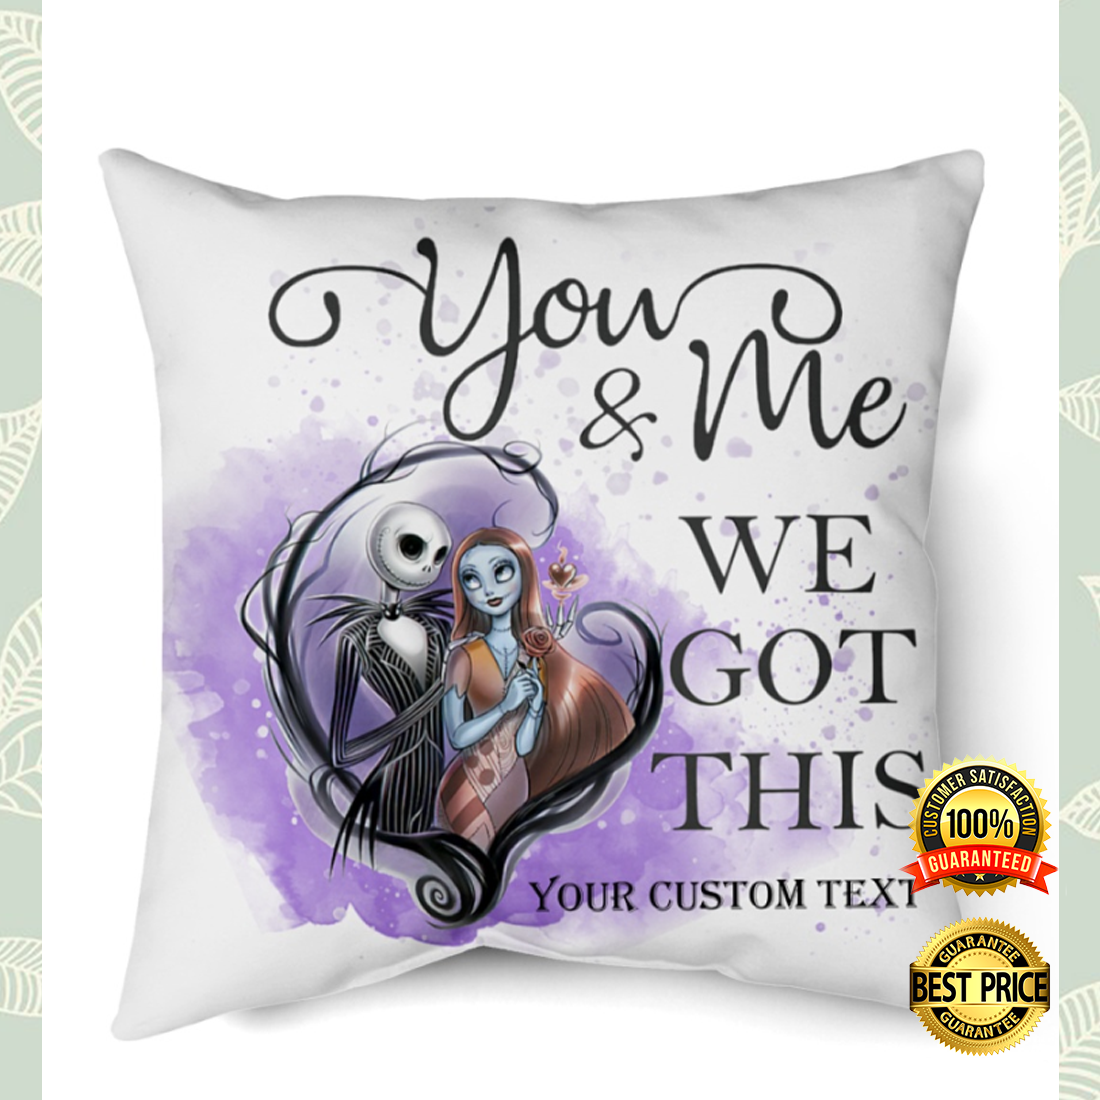 Personalized Jack and Sally you and me we got this pillow